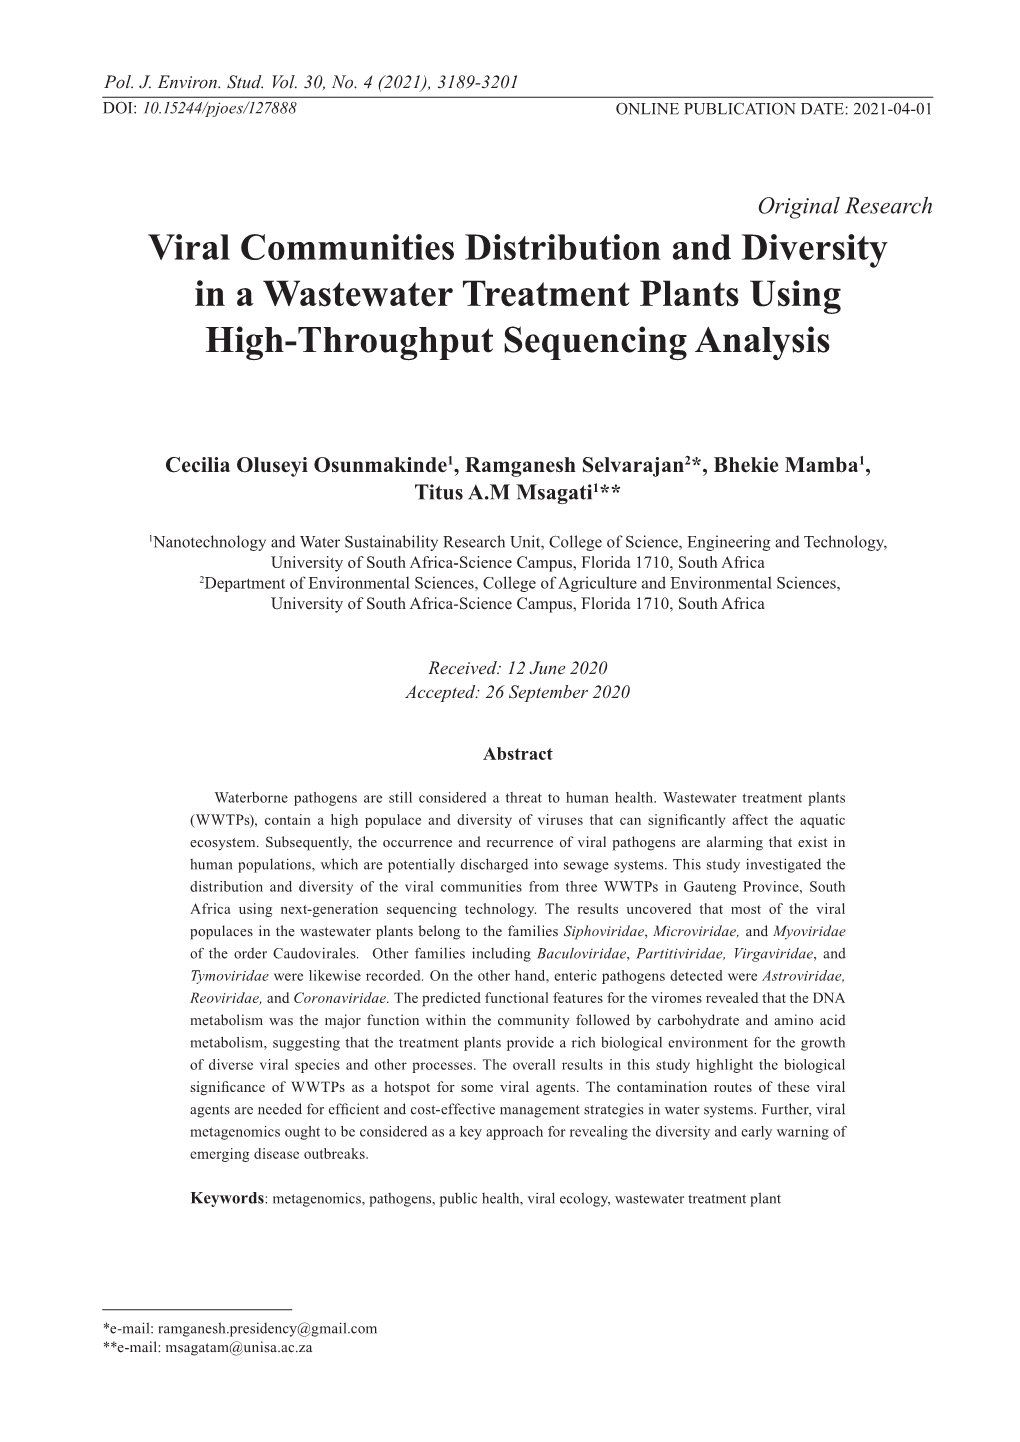 Viral Communities Distribution and Diversity in a Wastewater Treatment Plants Using High-Throughput Sequencing Analysis